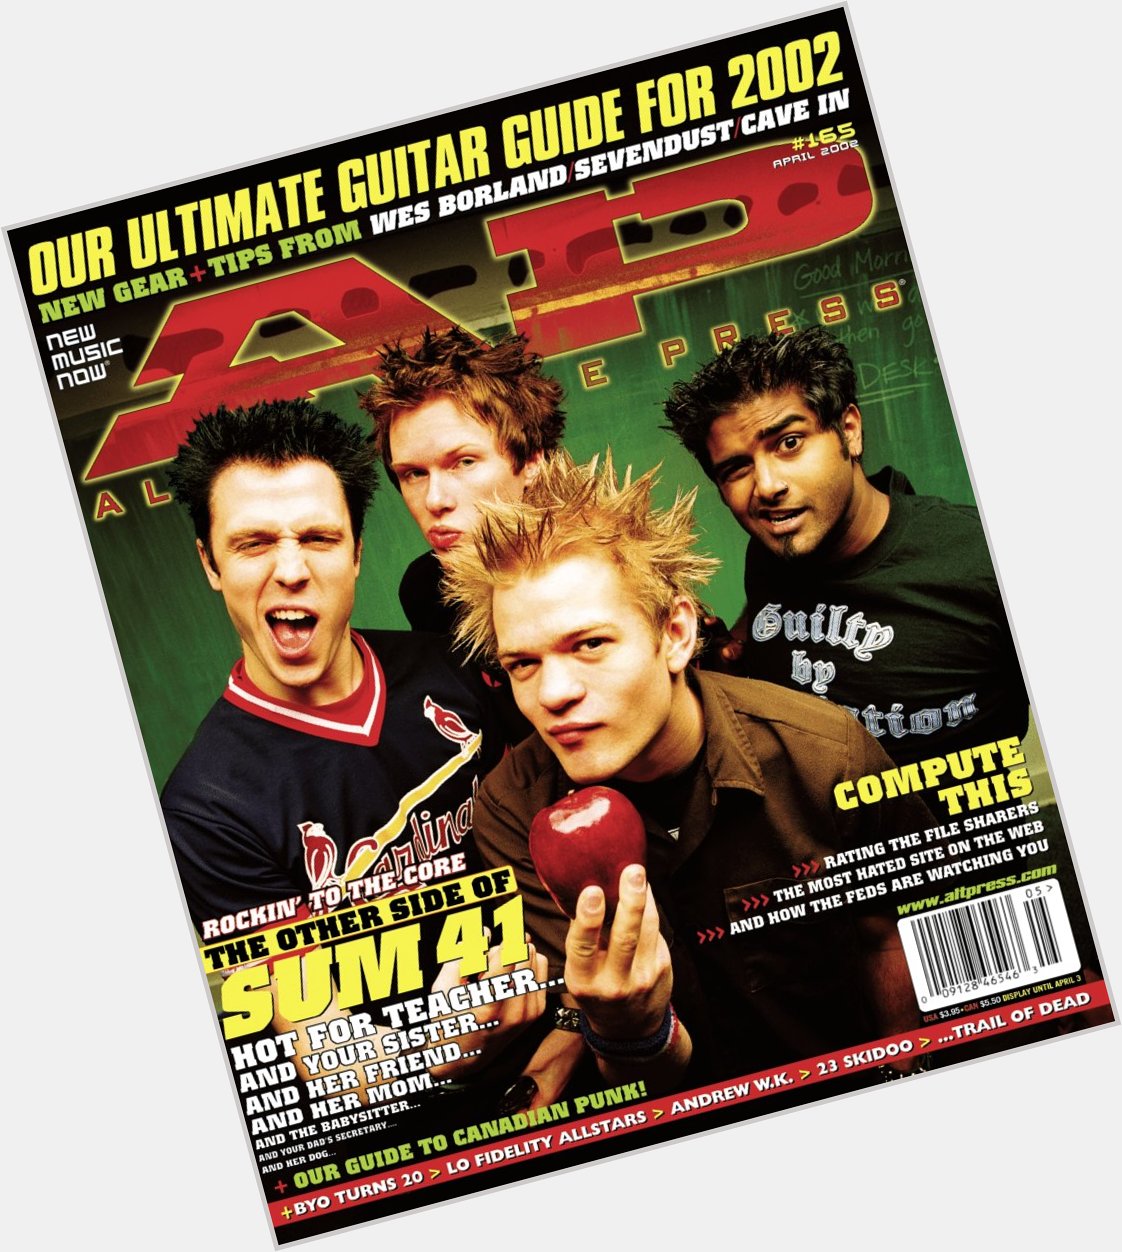 Happy birthday to Deryck Whibley of who appeared on our cover in April 2002! 